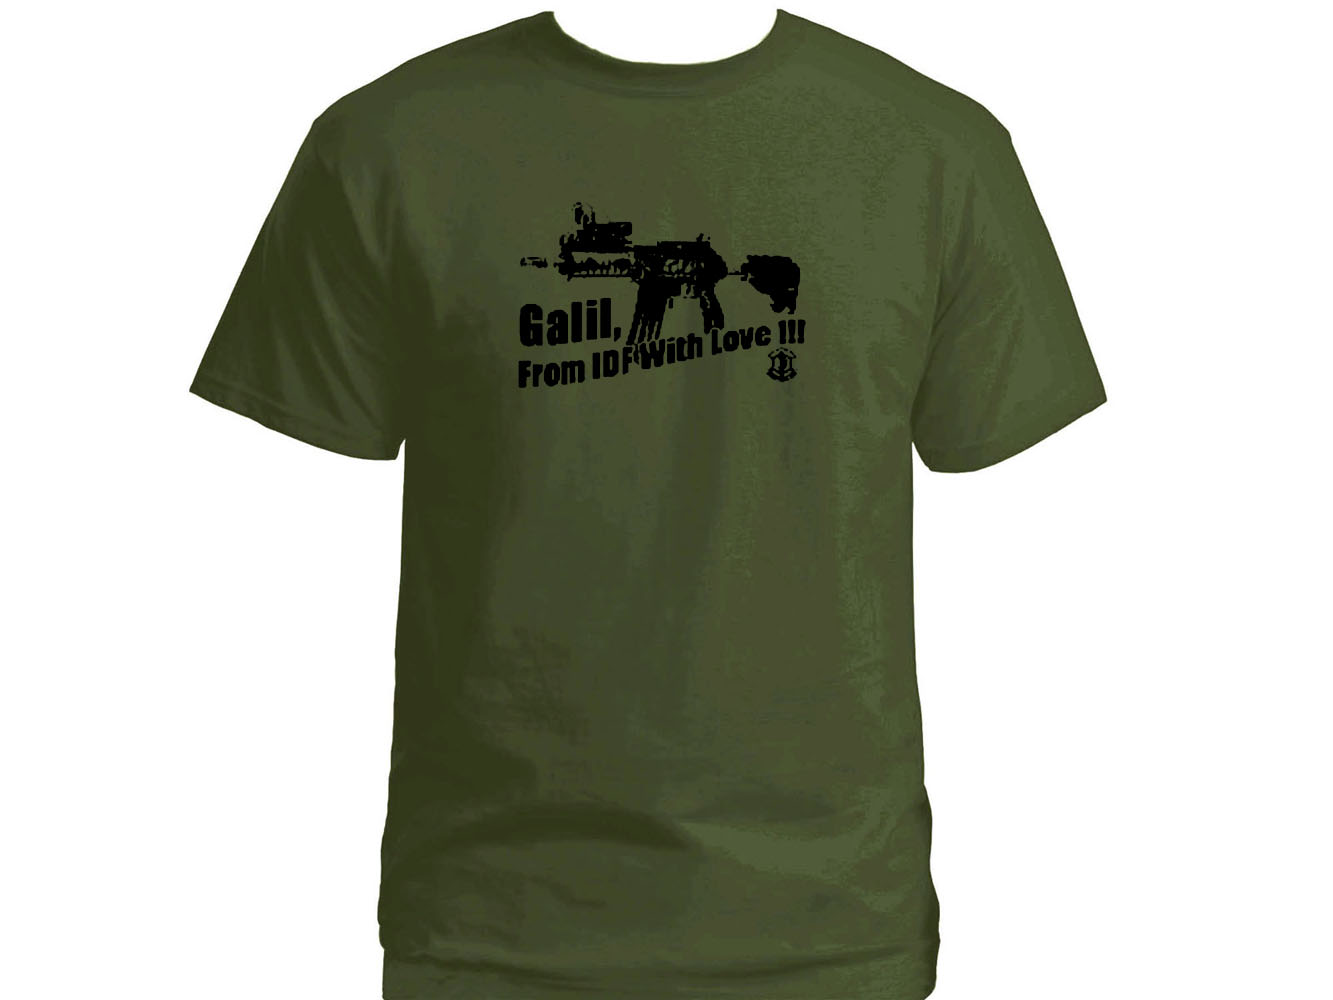 Galil Assault Rifle Israel Army Weapon olive t-shirt